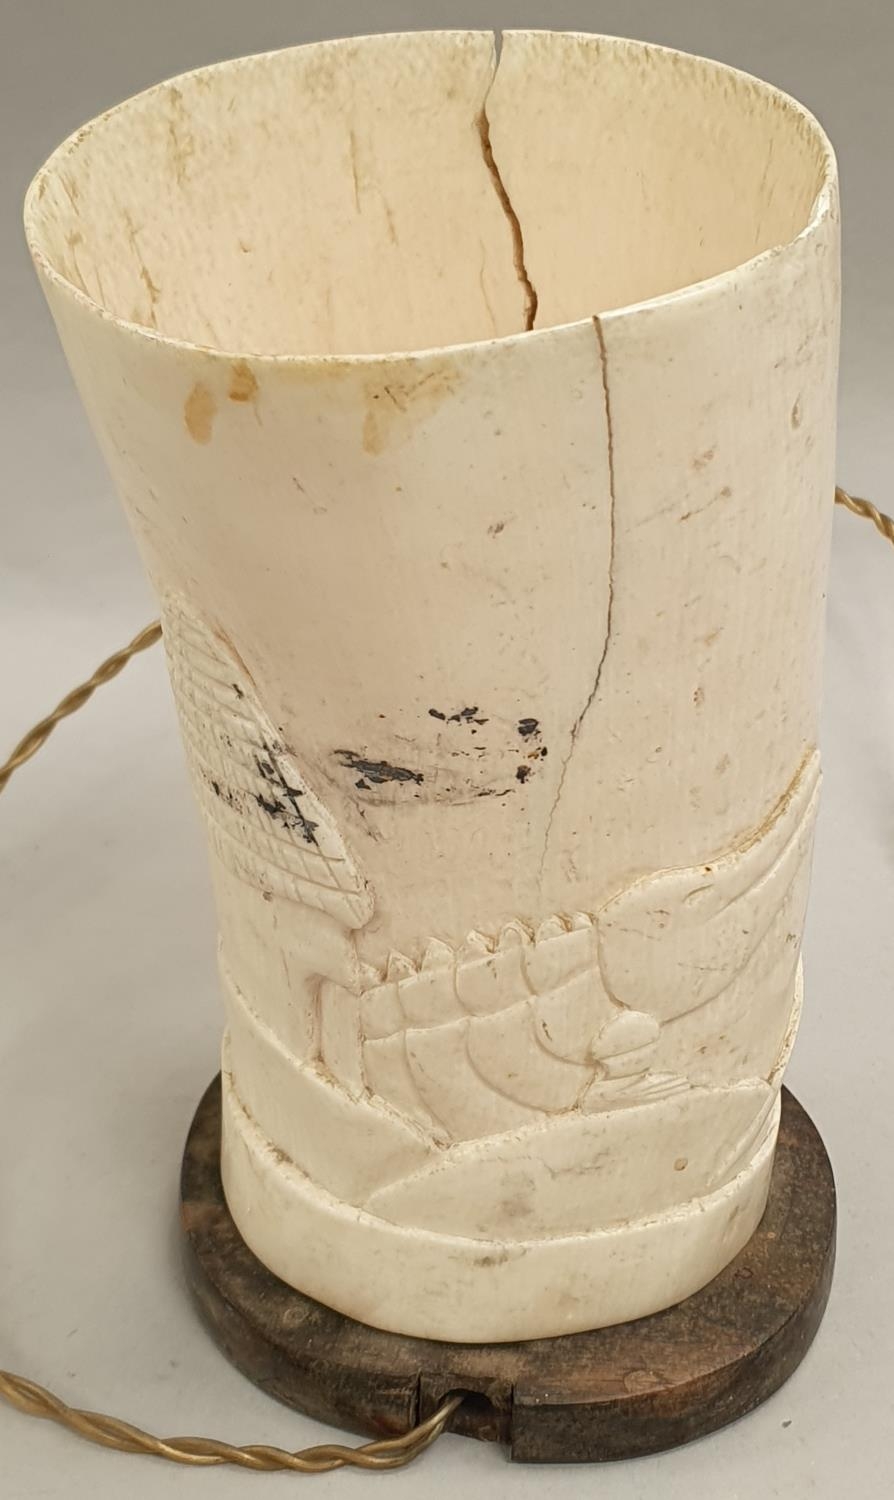 Vintage table lamp with ivory shade depicting elephants 20cm tall. - Image 3 of 4